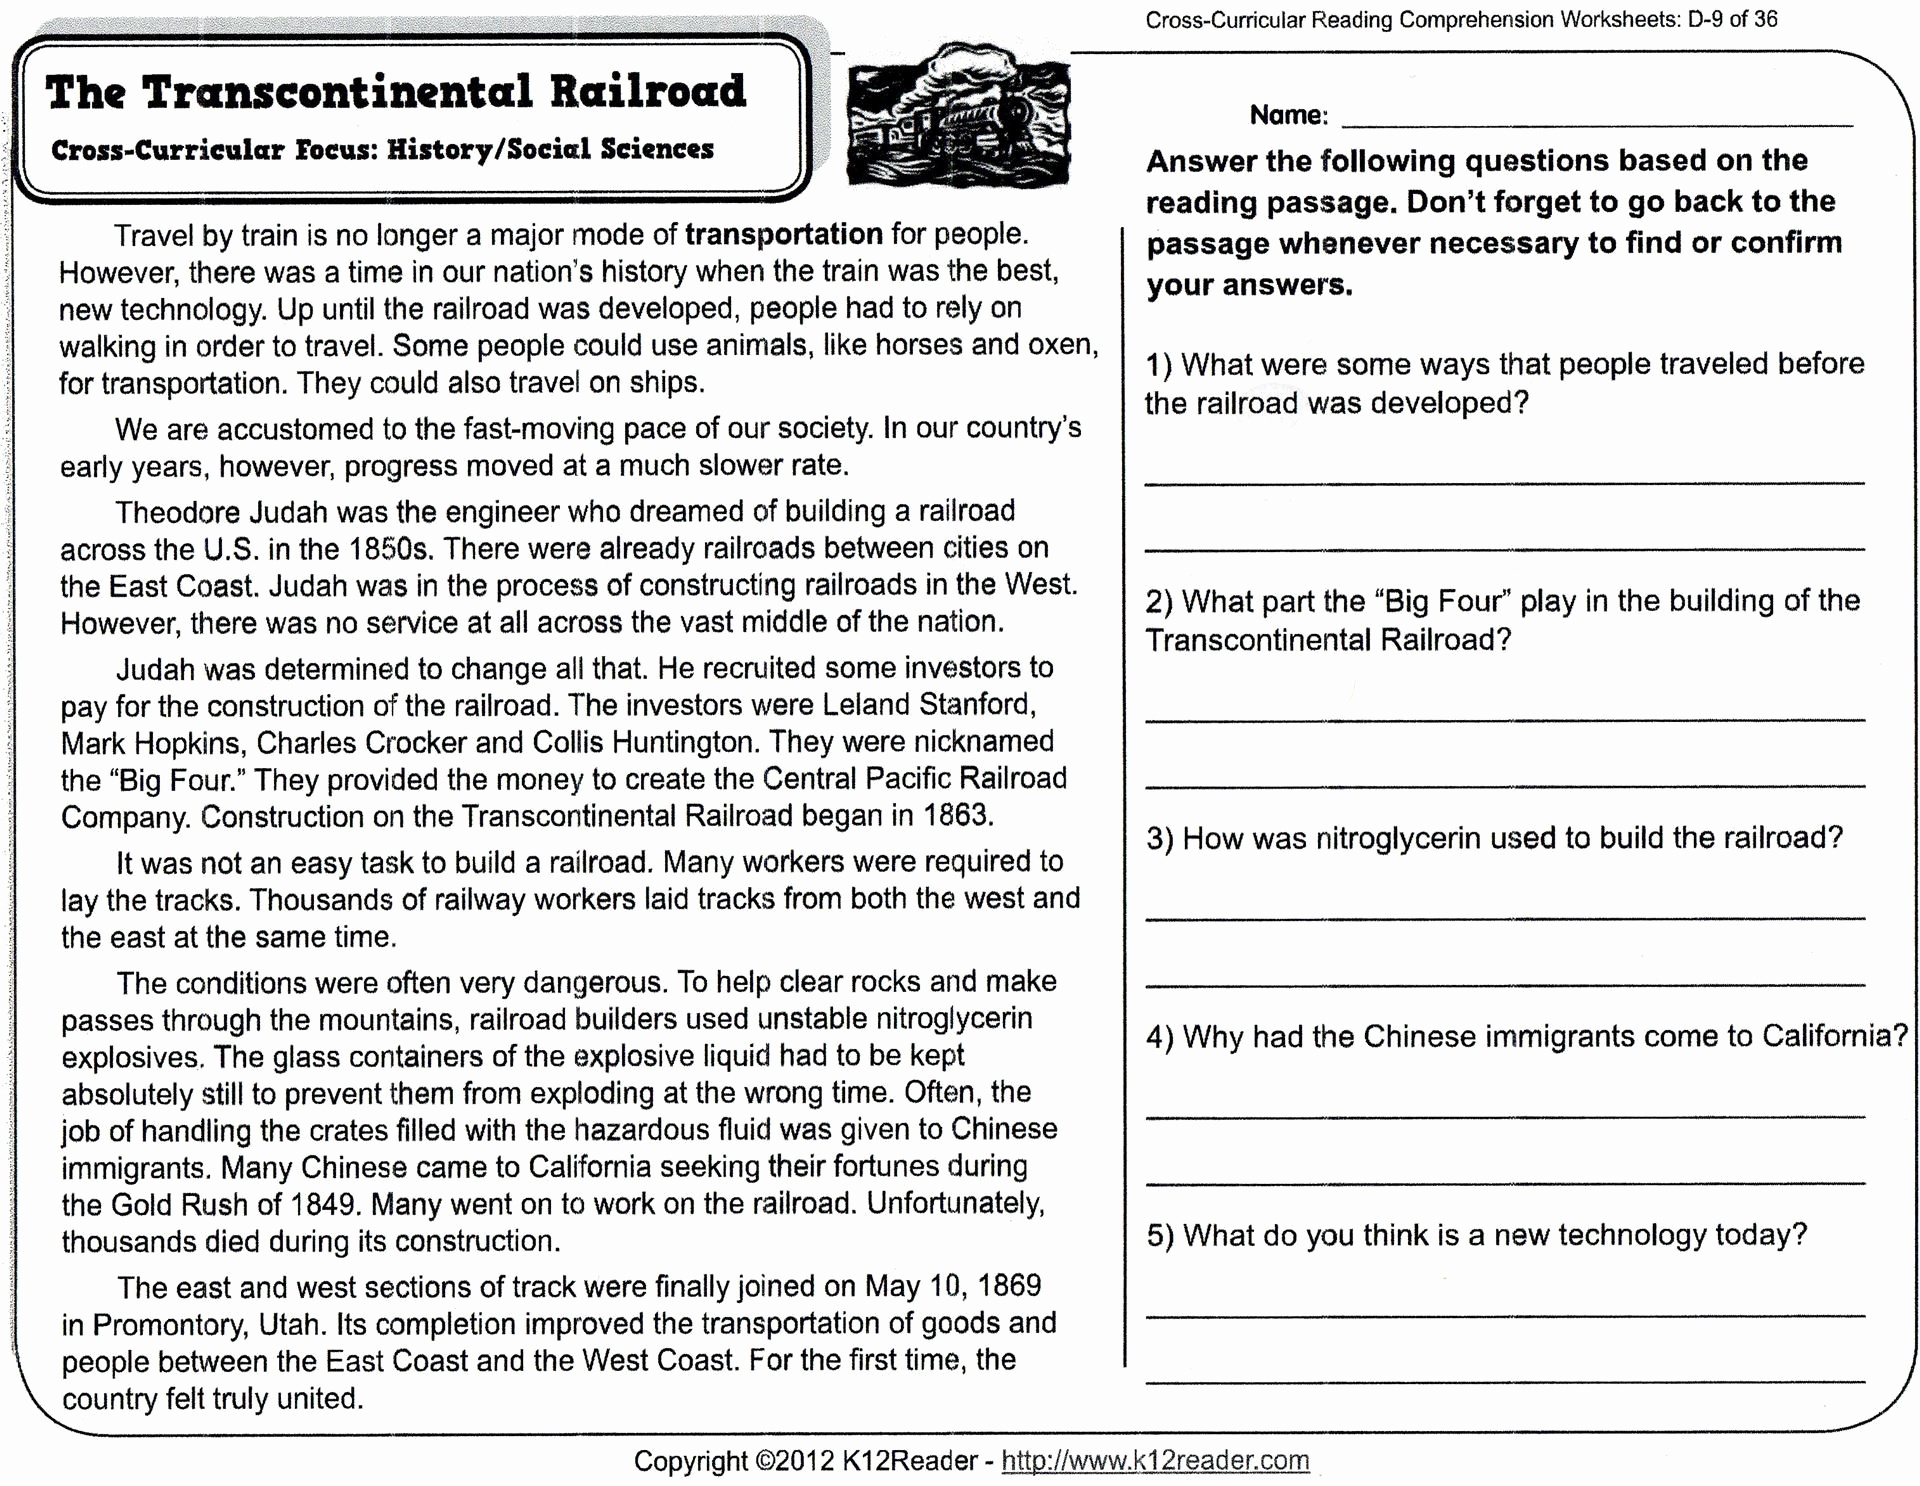 Reading Comprehension Worksheets For 8Th Grade Free Report Templates - Free Printable Reading Comprehension Worksheets Grade 5